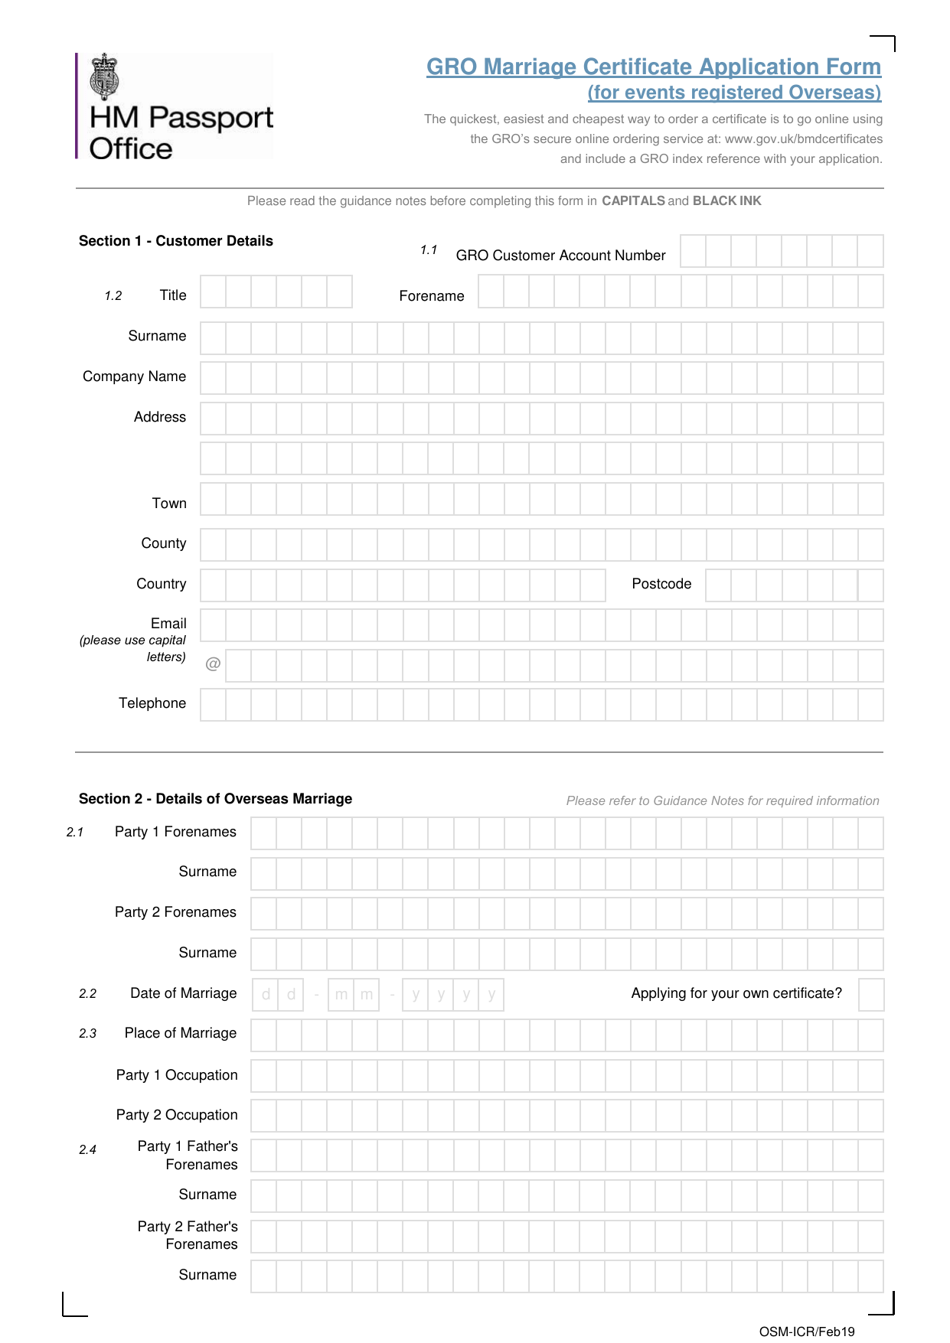 Gro Marriage Certificate Application Form (For Events Registered Overseas) - United Kingdom, Page 1